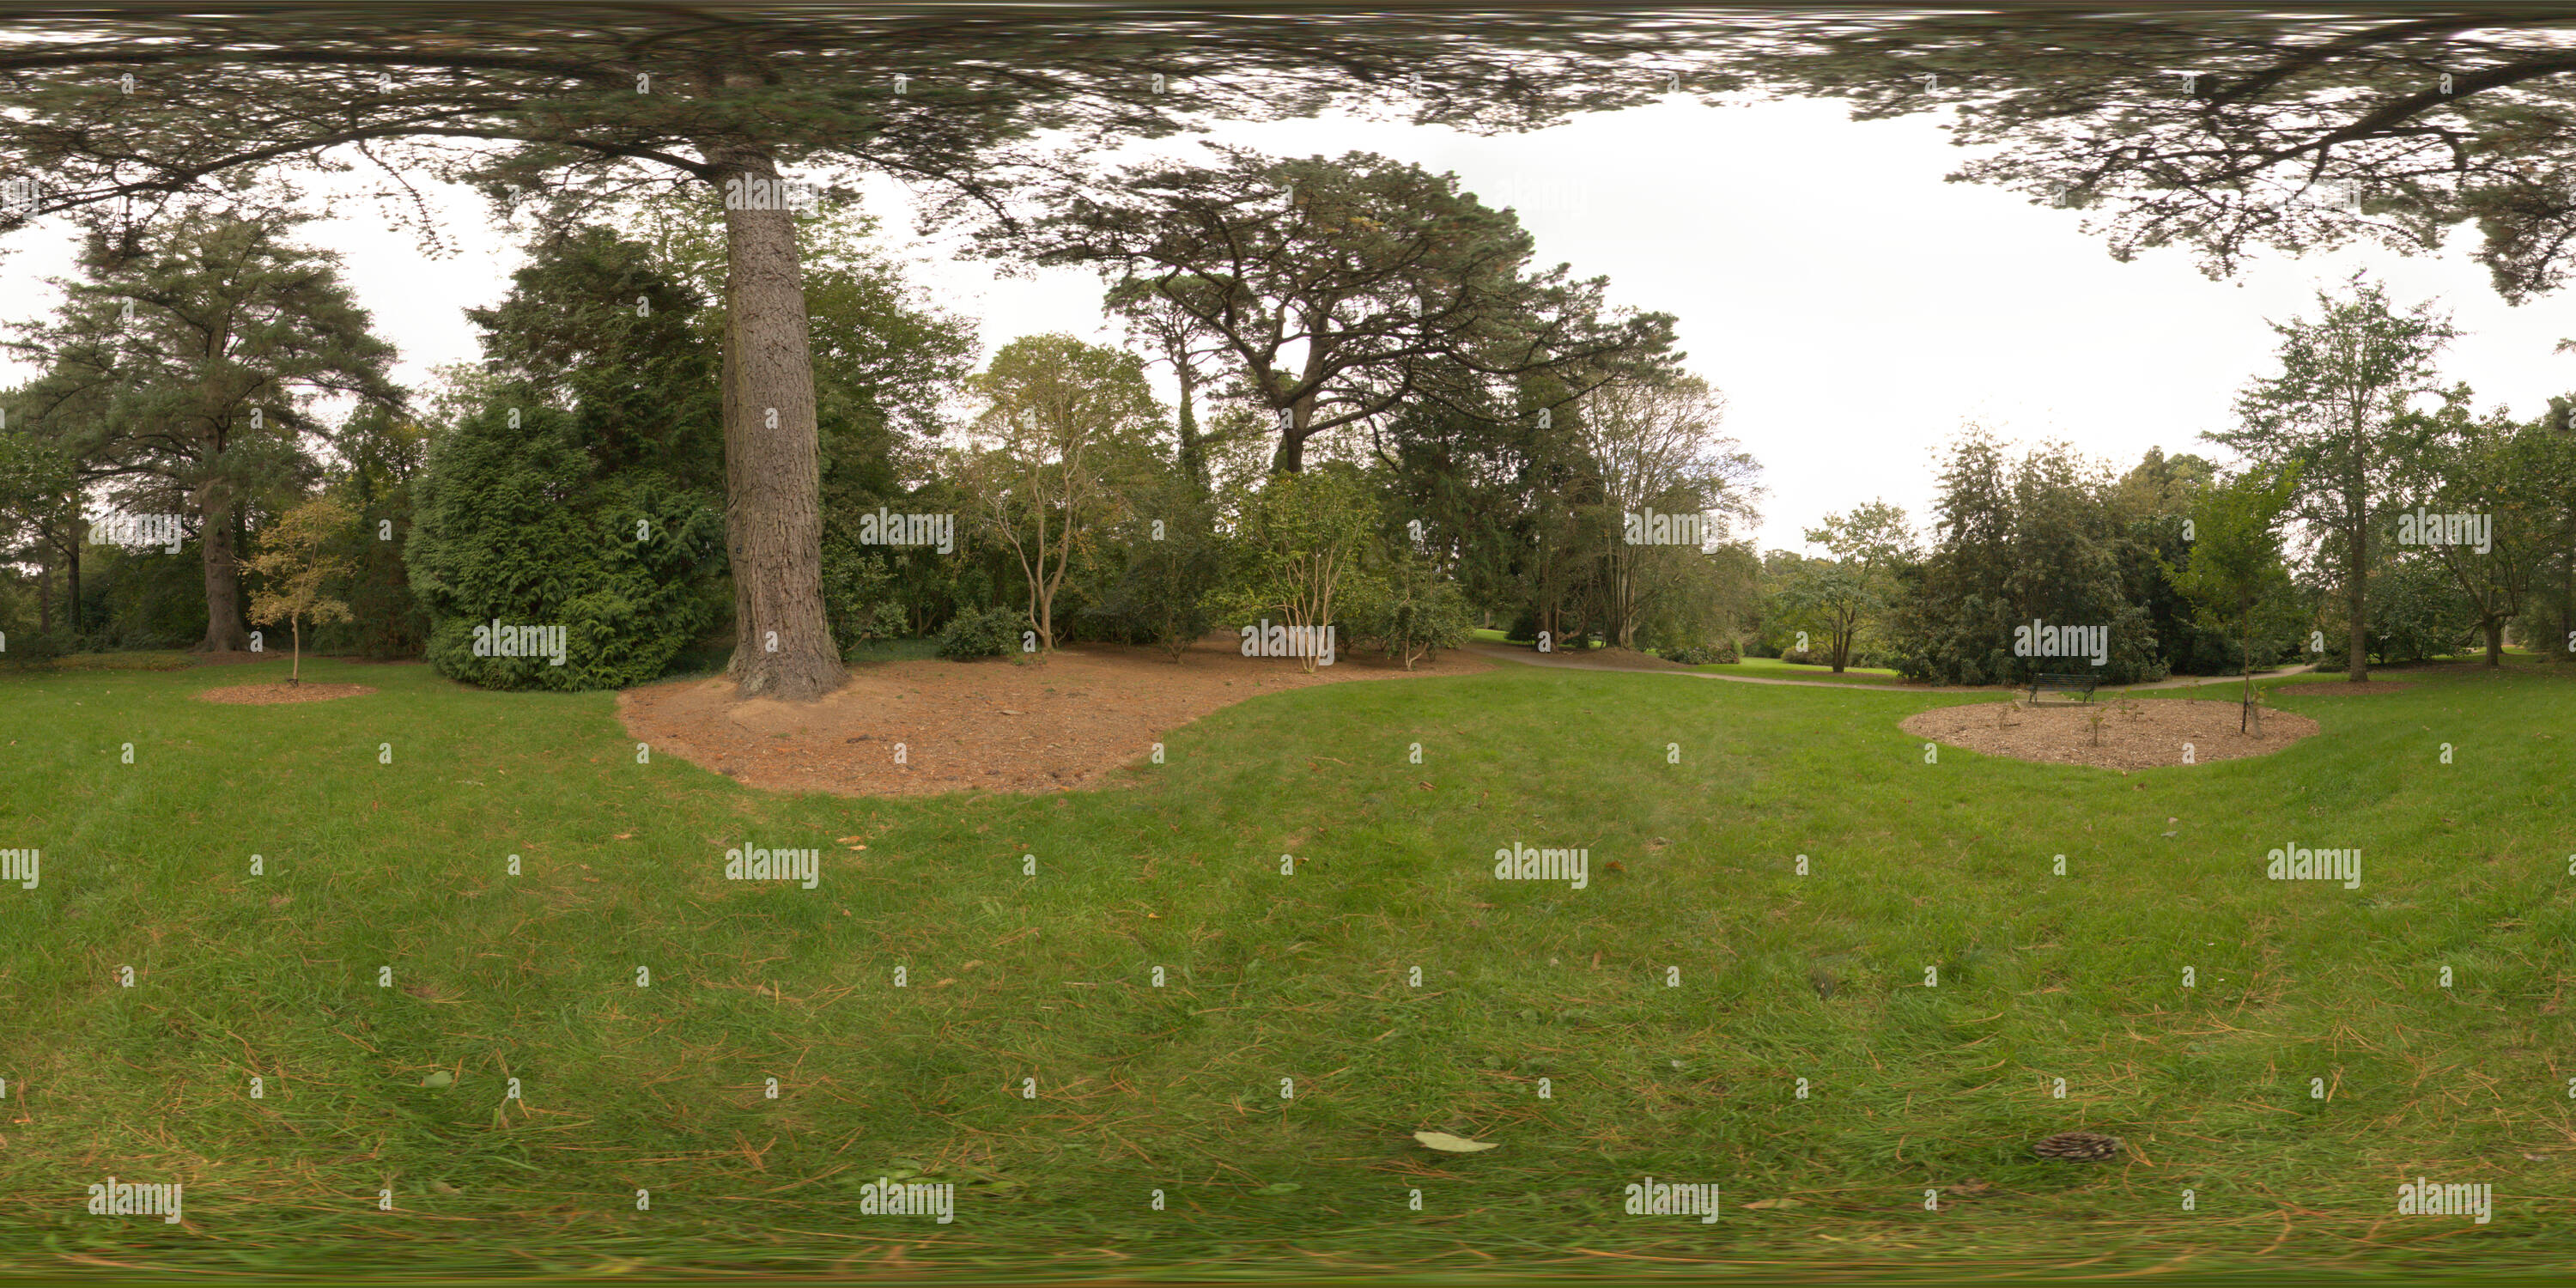 360 degree panoramic view of Trees in Trelissick Gardens, Cornwall